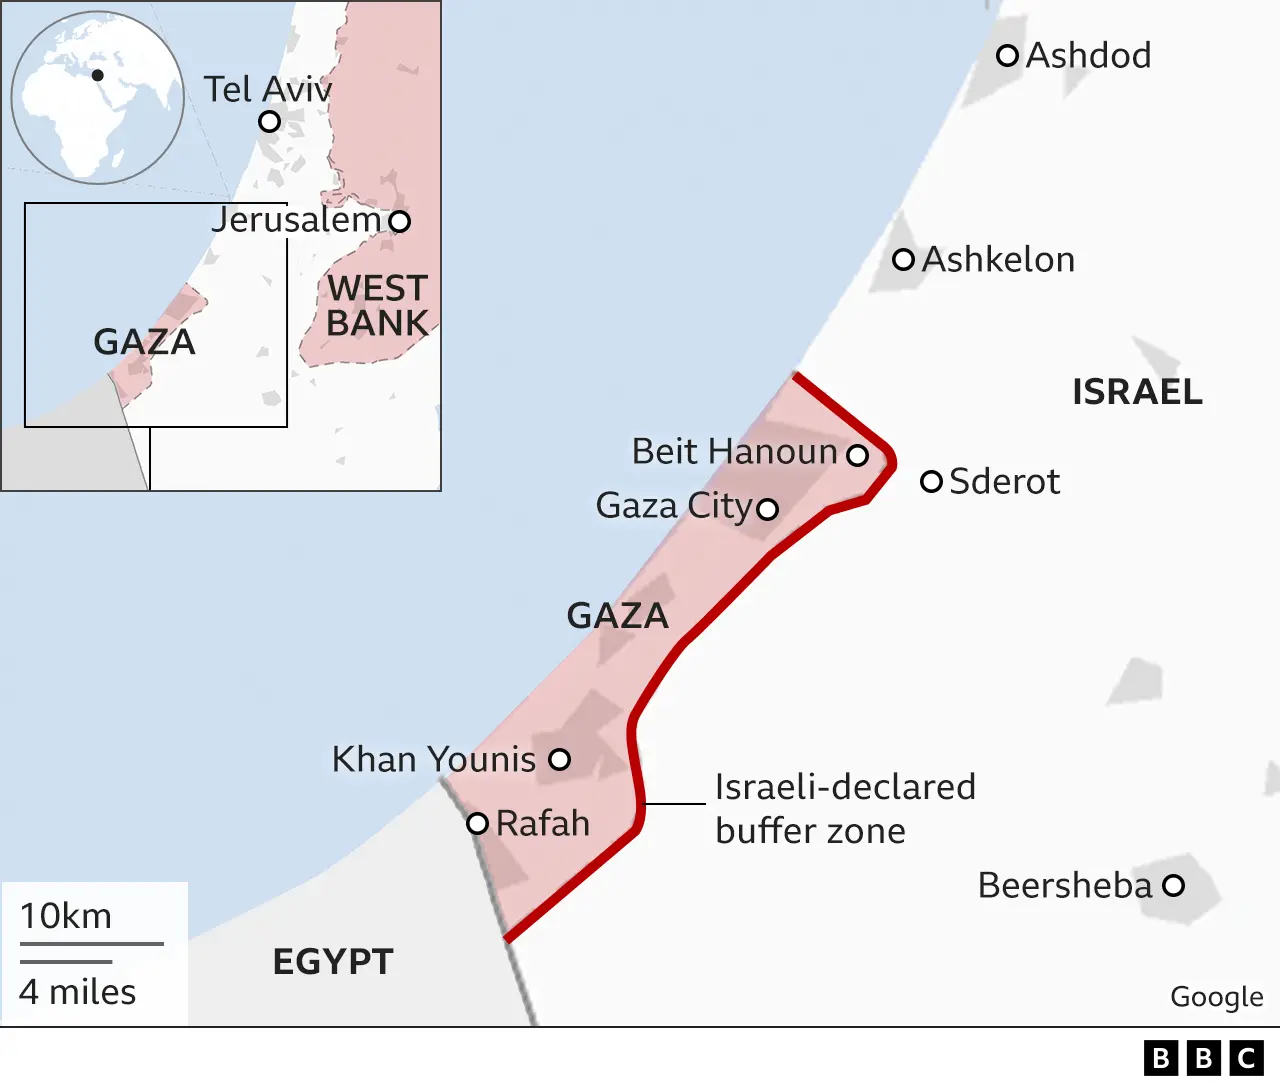 Gaza Strip in maps: How life has changed in three months - BBC News